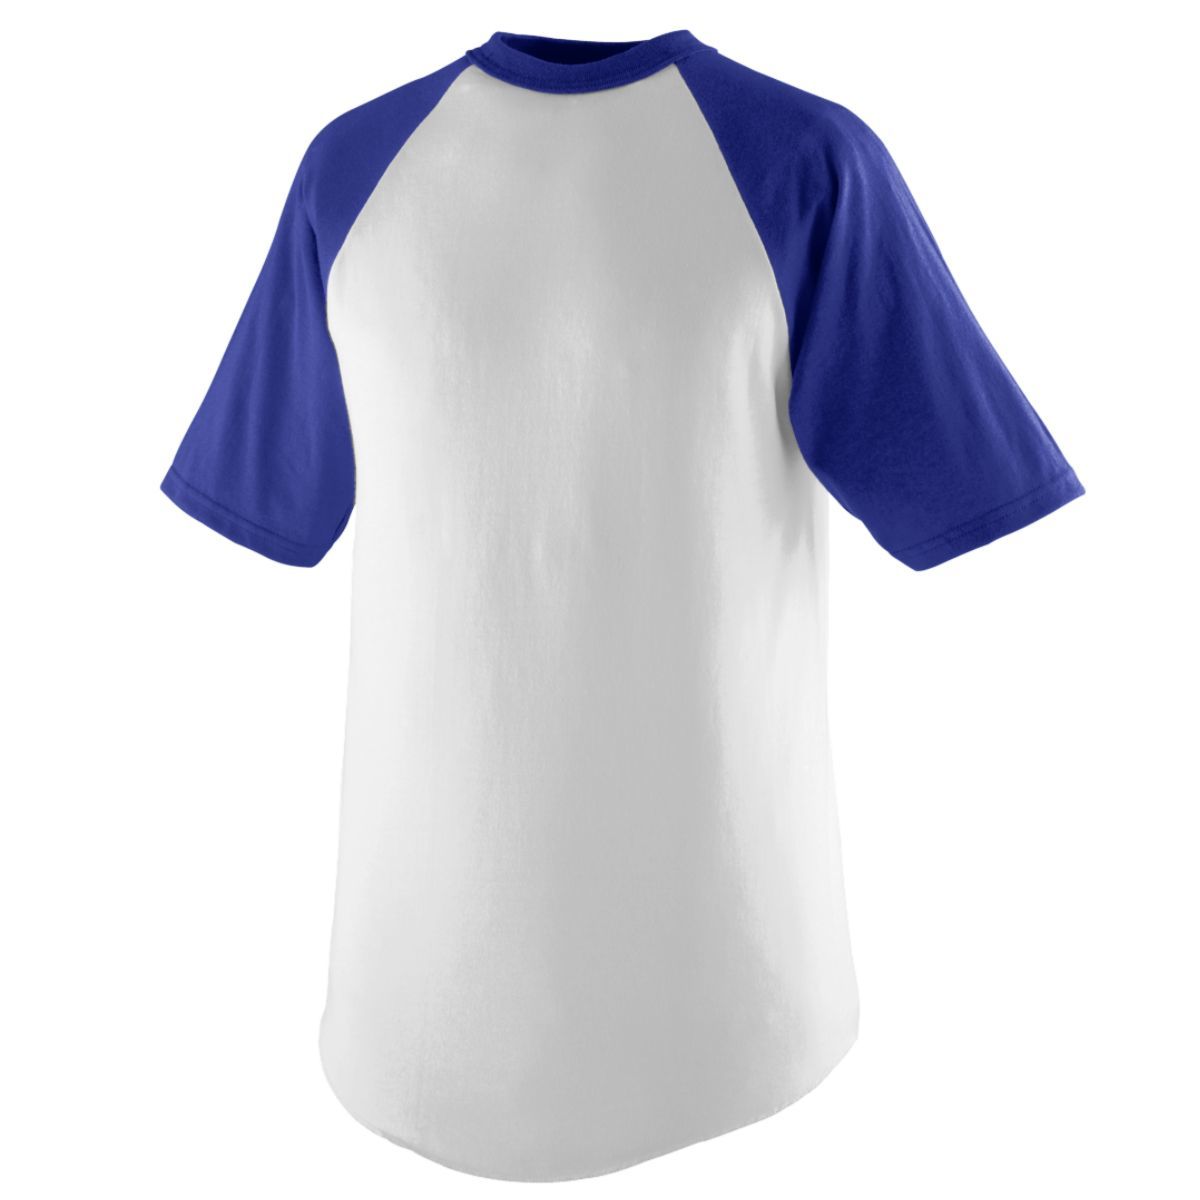 Augusta Sportswear Youth Short Sleeve Baseball Jersey in White/Purple  -Part of the Youth, Youth-Jersey, Augusta-Products, Baseball, Shirts, All-Sports, All-Sports-1 product lines at KanaleyCreations.com